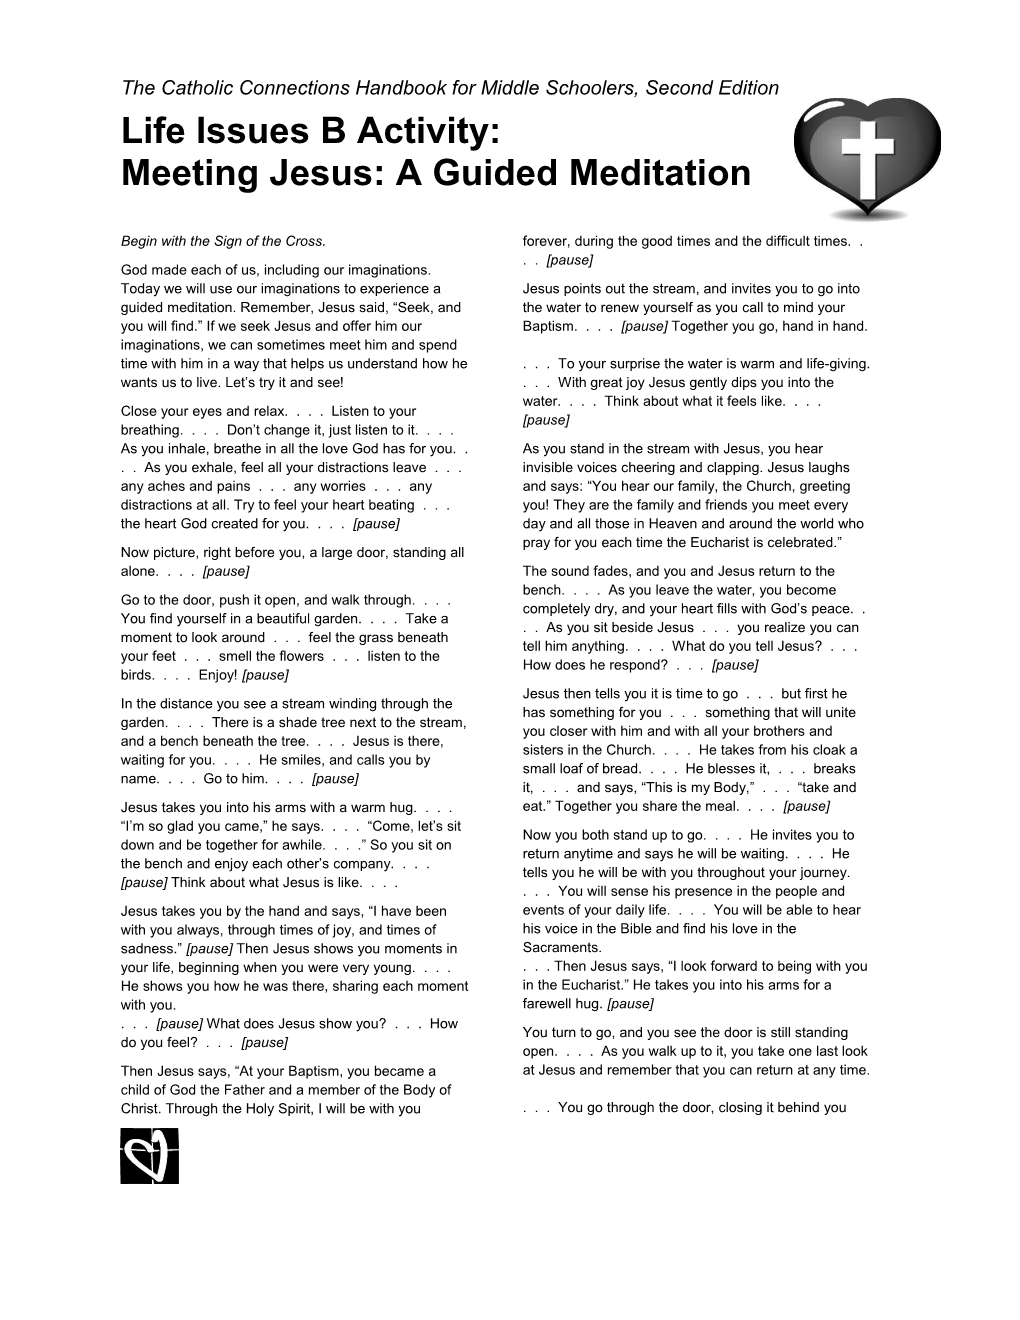 Life Issues Bactivity: Meeting Jesus: a Guided Meditation